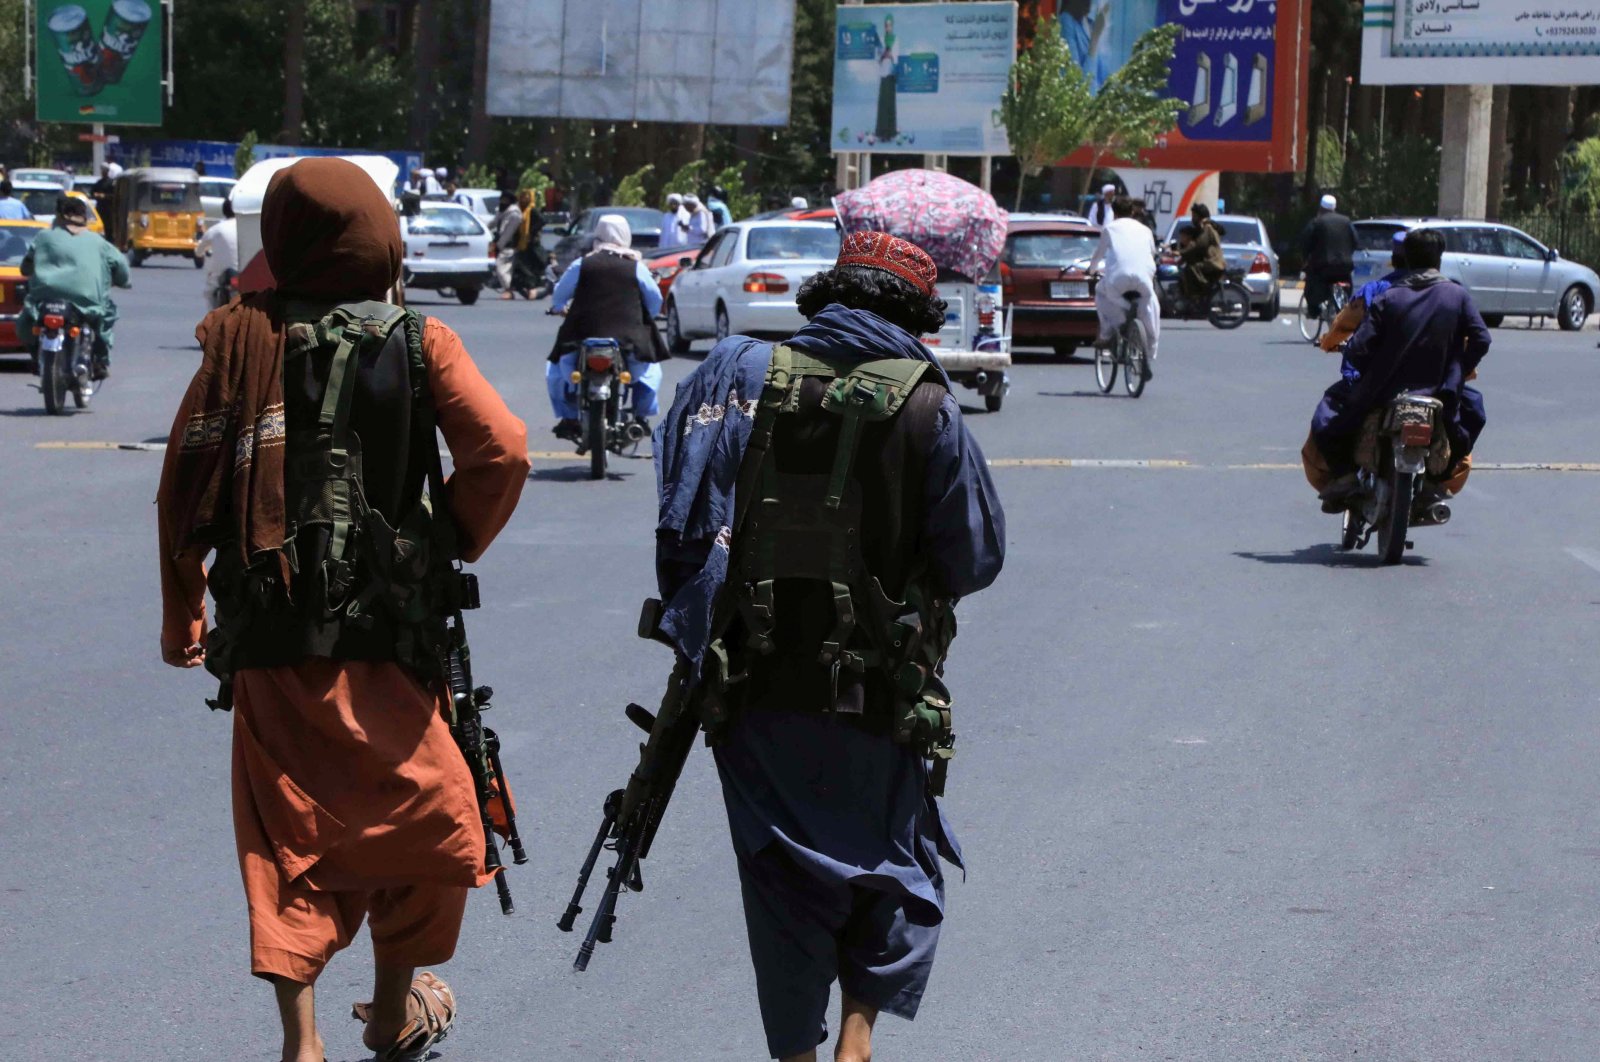 Taliban forces patrol a street in Herat, Afghanistan, Aug. 14, 2021. (Reuters Photo)